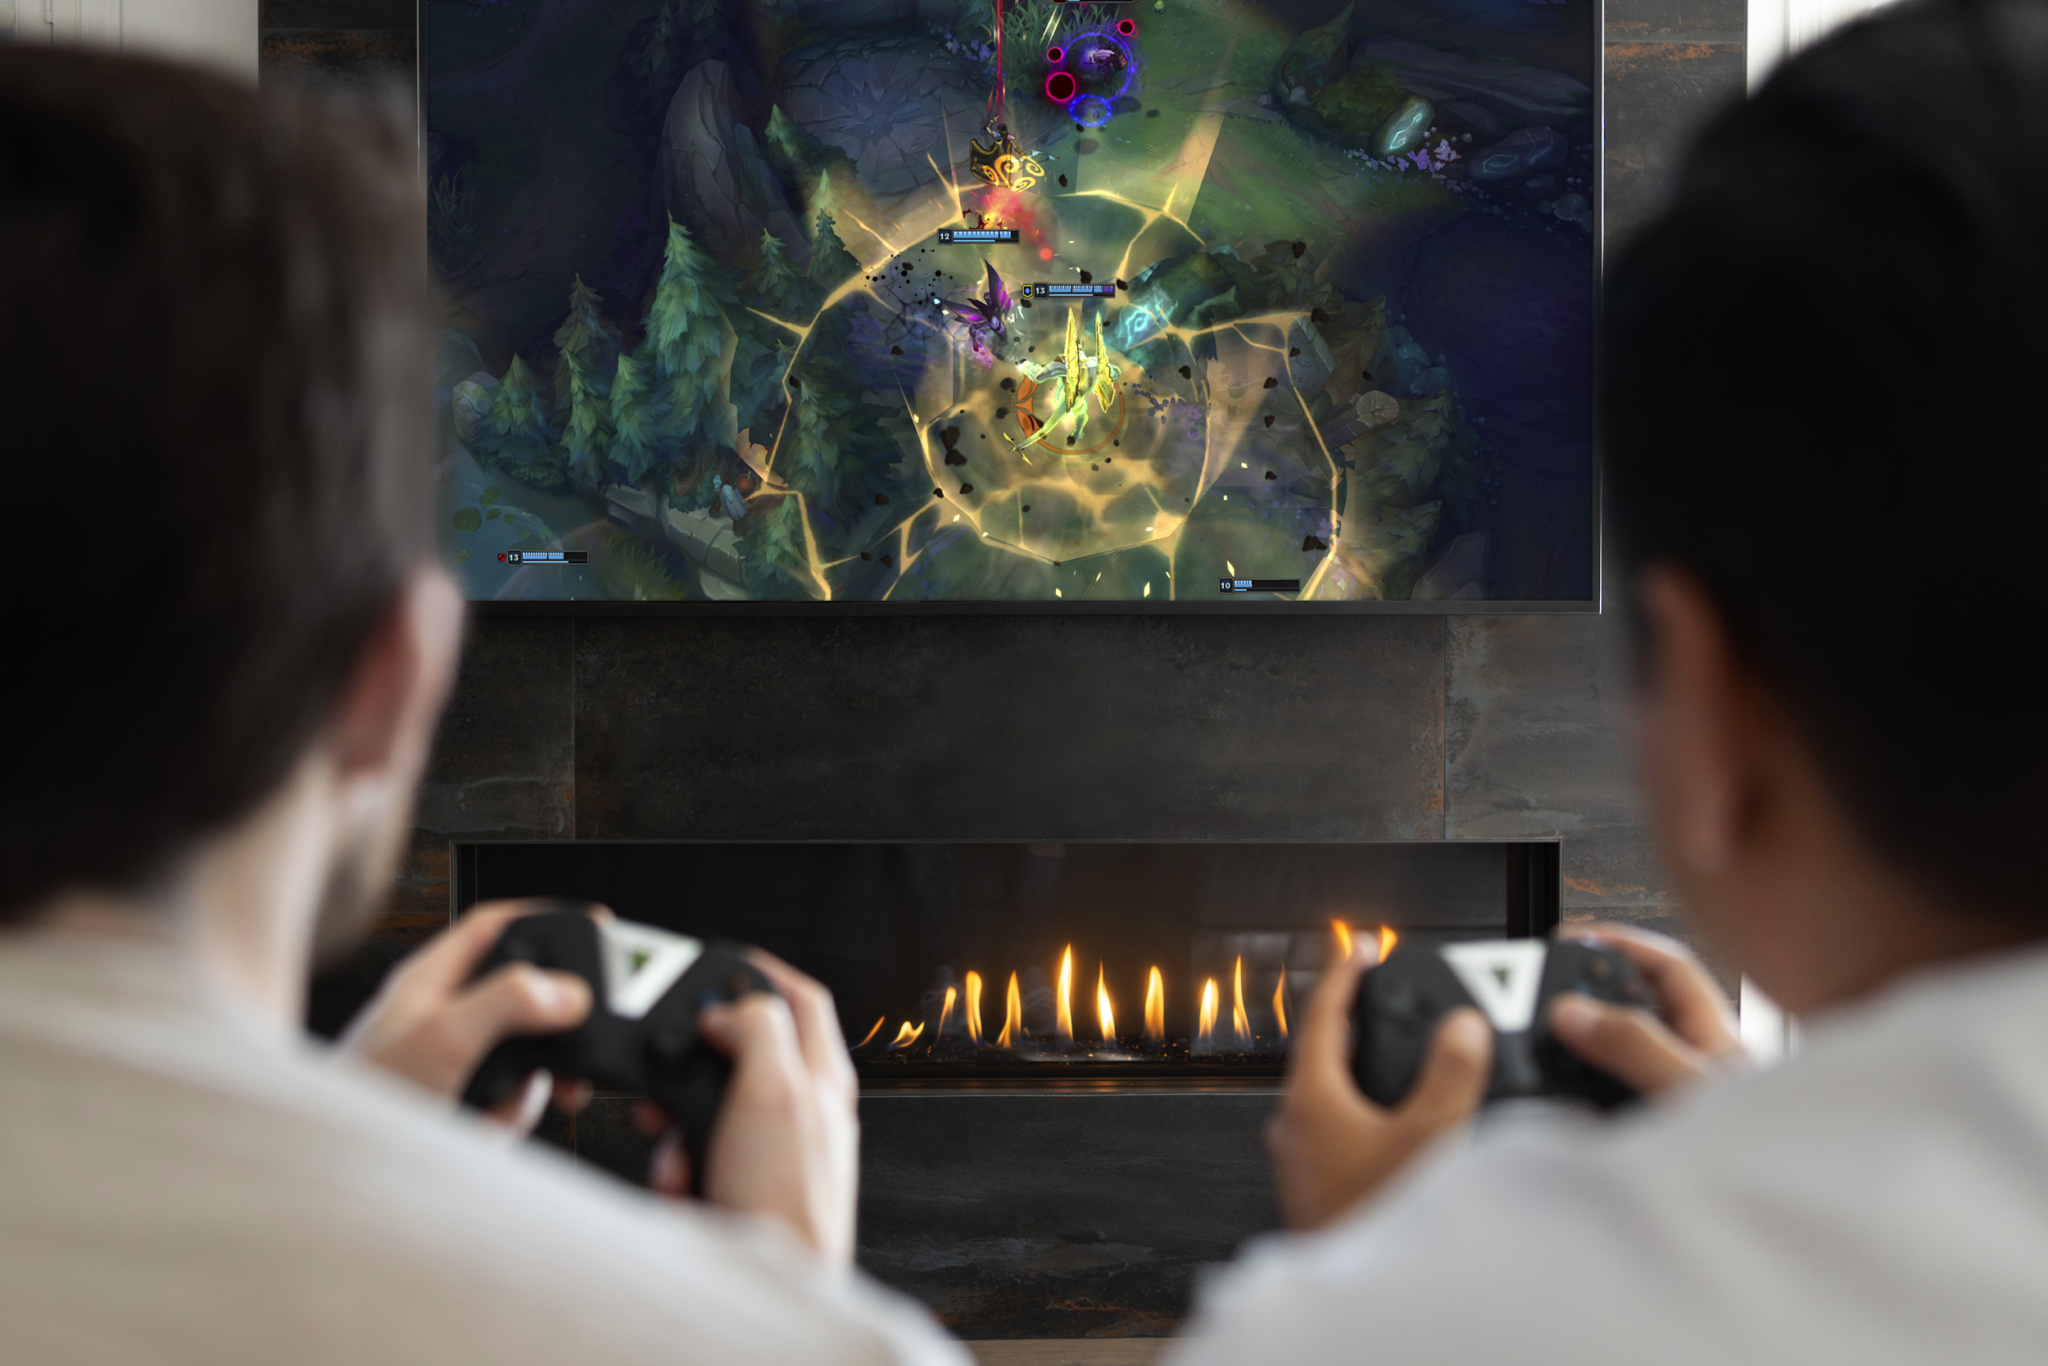 Game with your Samsung TV and NVIDIA graphics card